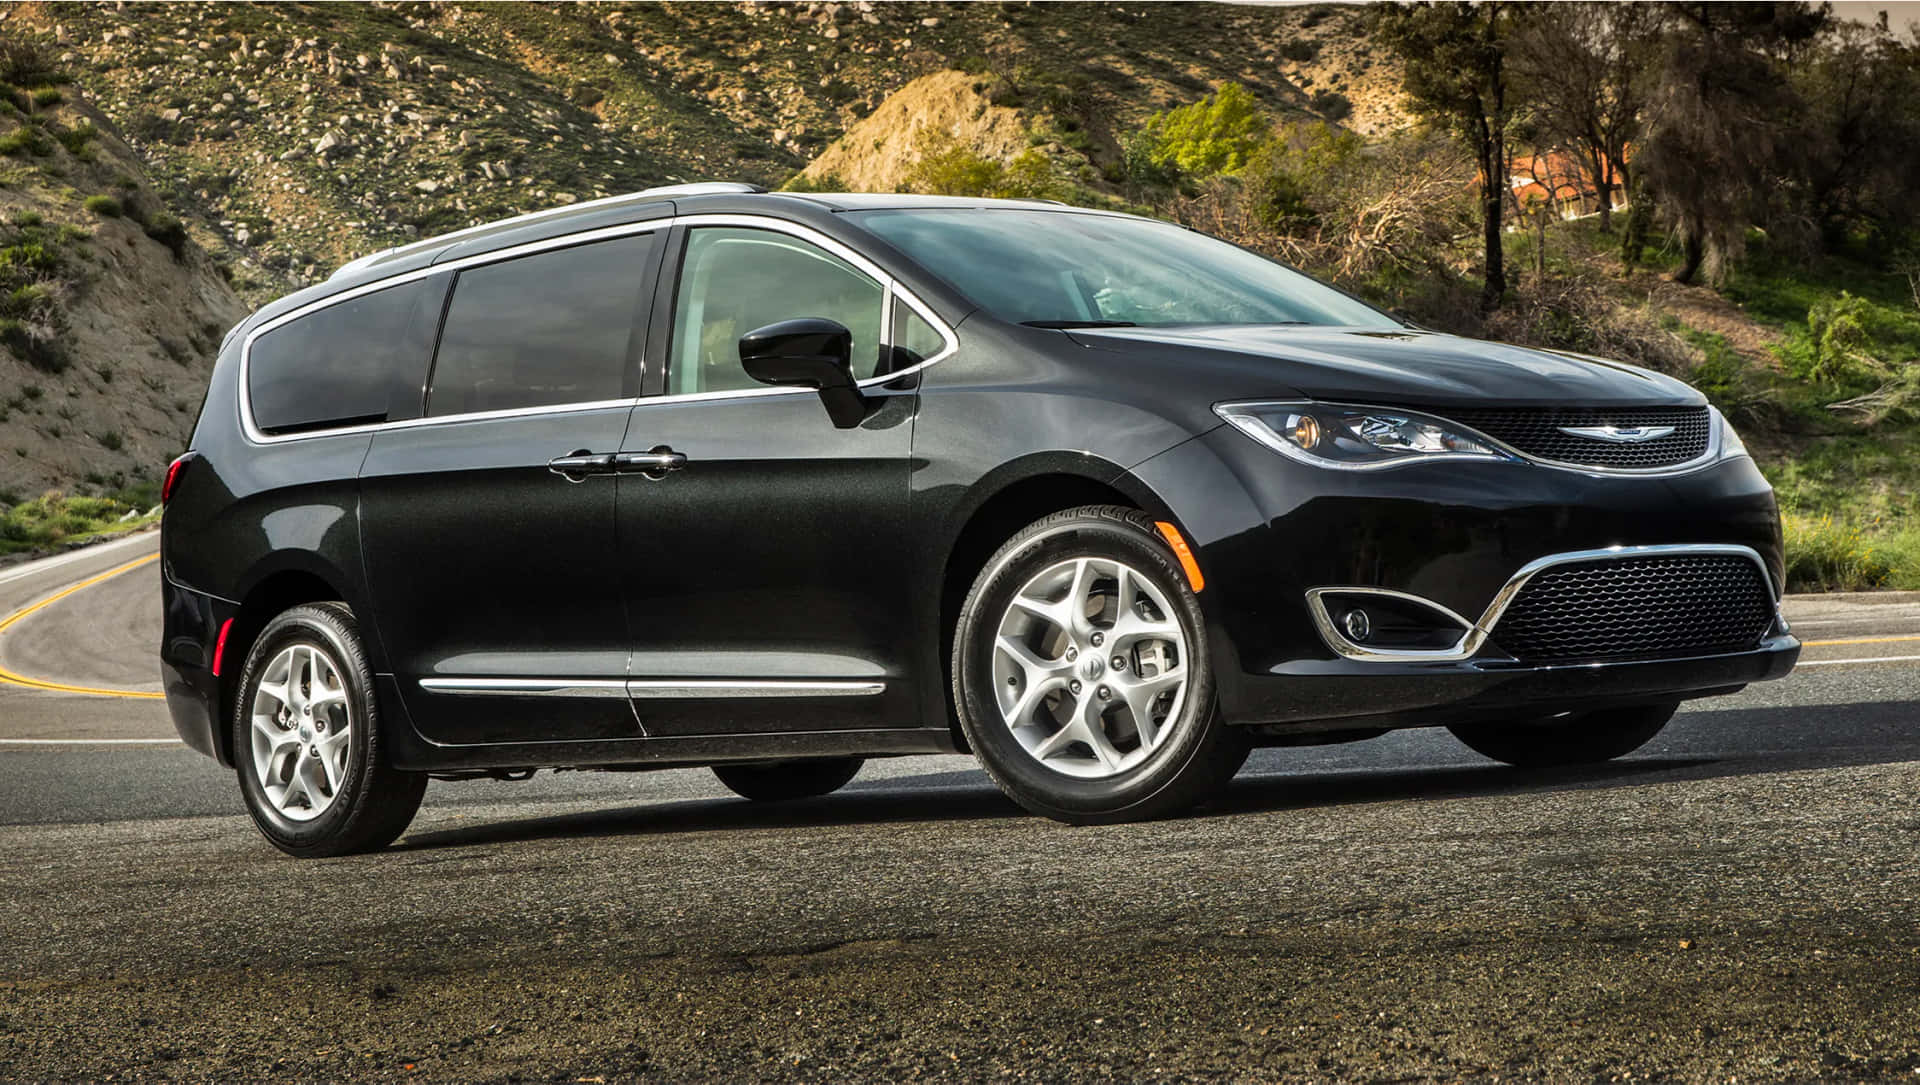 Stylish Chrysler Pacifica cruising on the open road Wallpaper